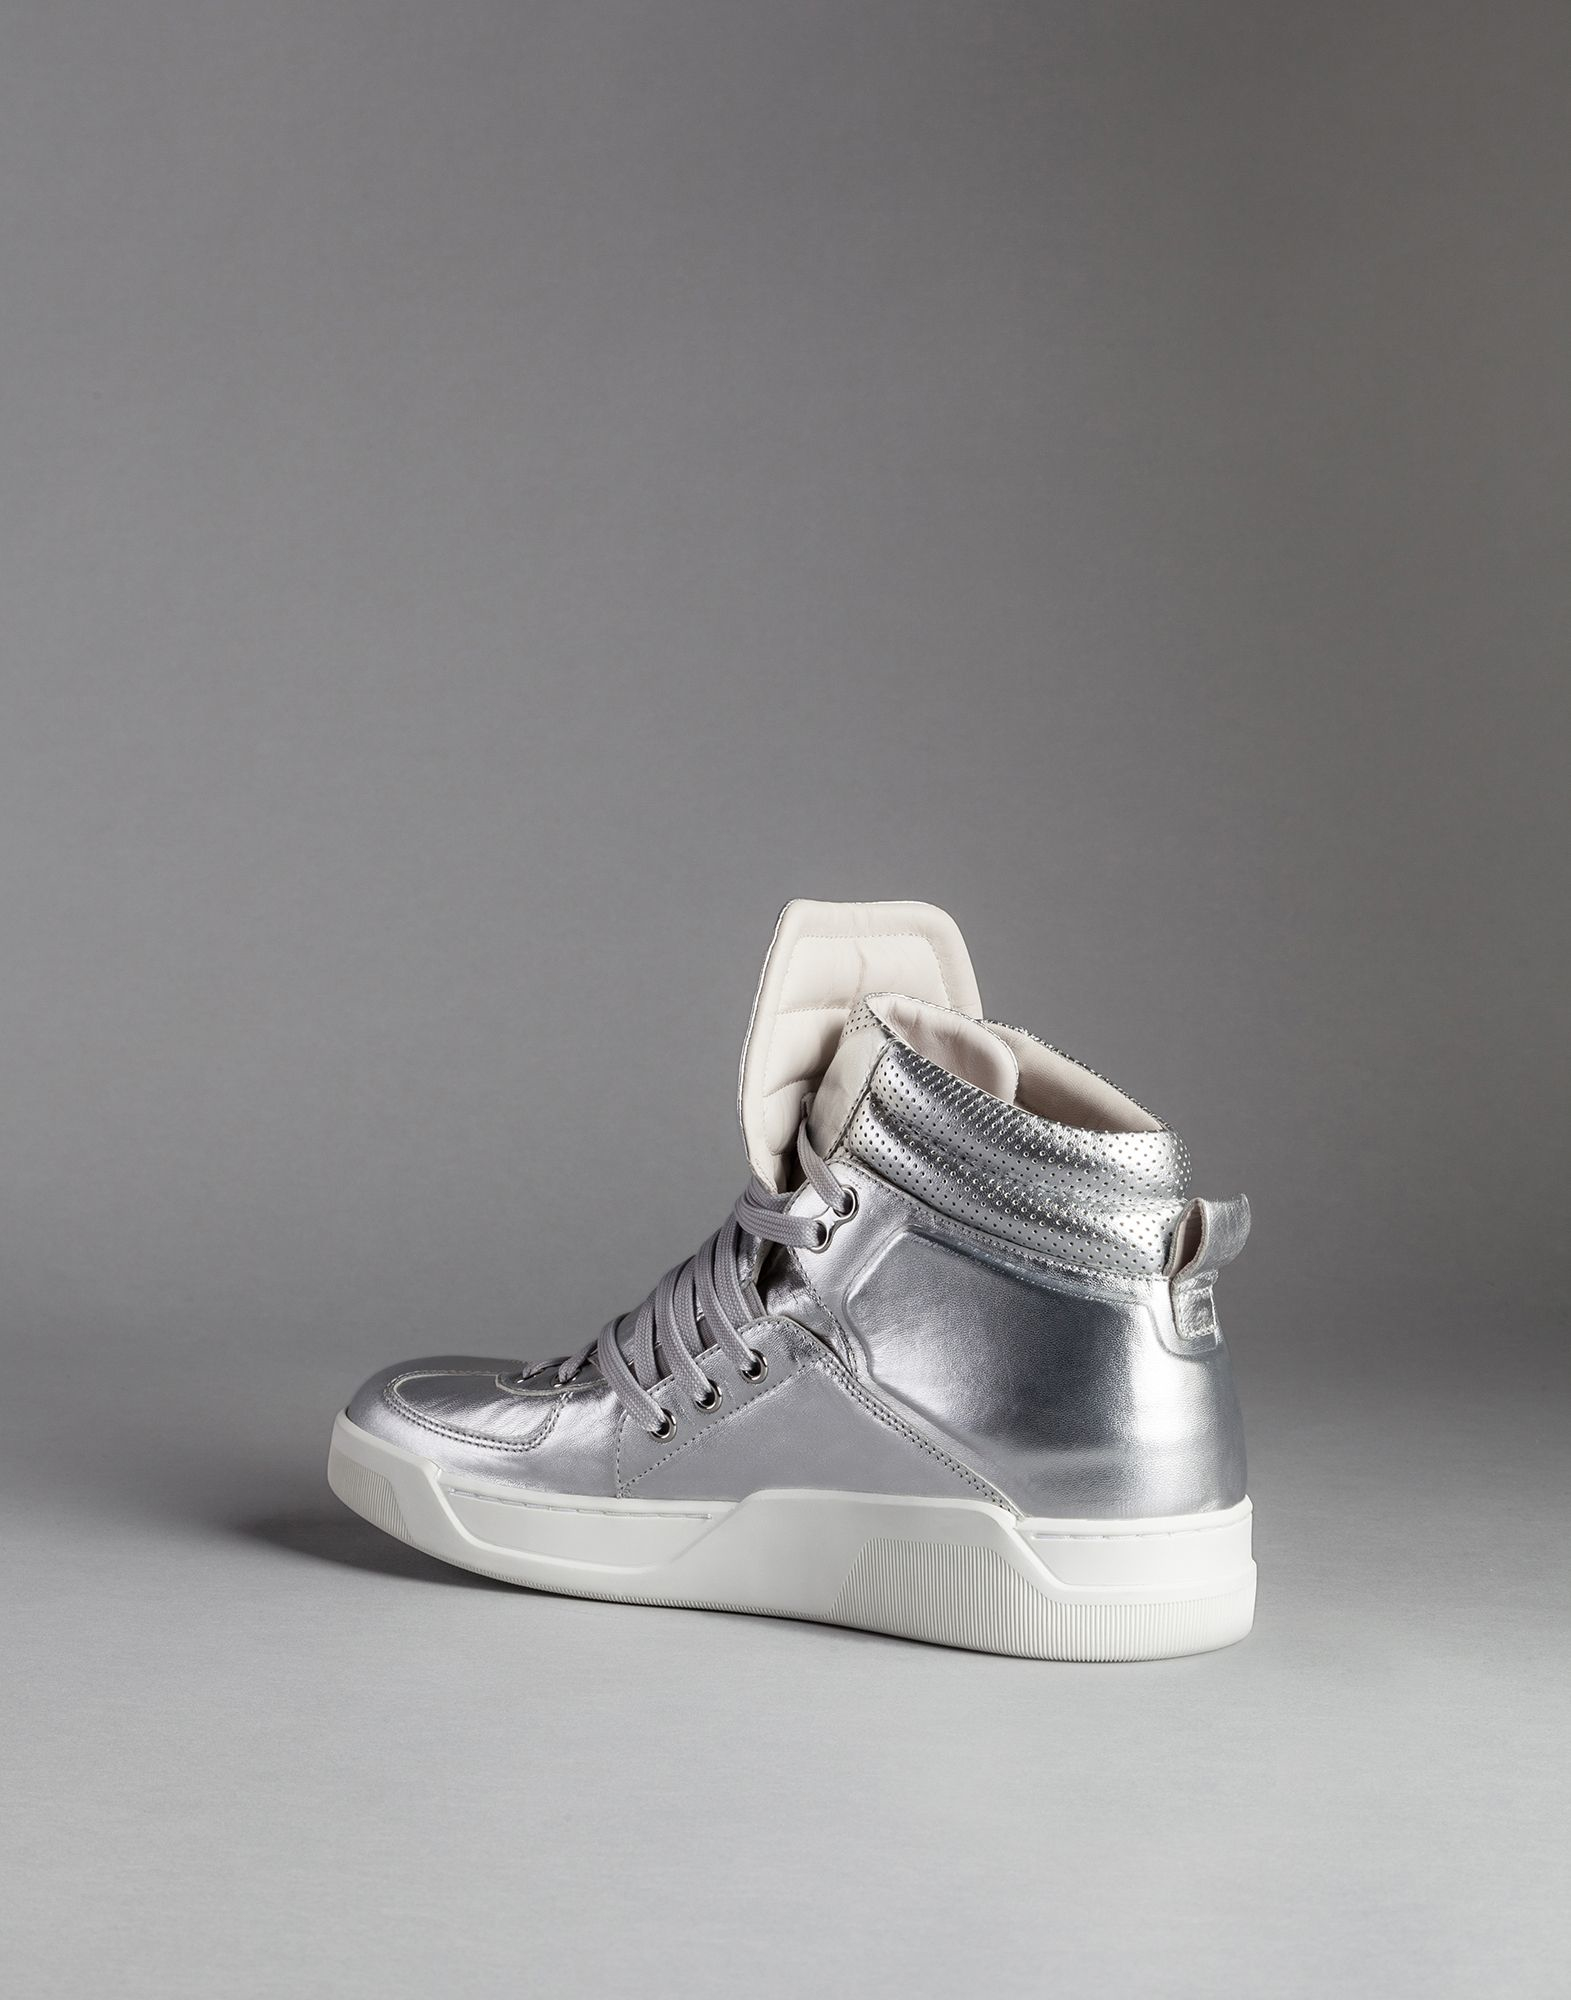 Dolce & Gabbana Laminated High Top Trainers in Silver (Metallic) for Men -  Lyst